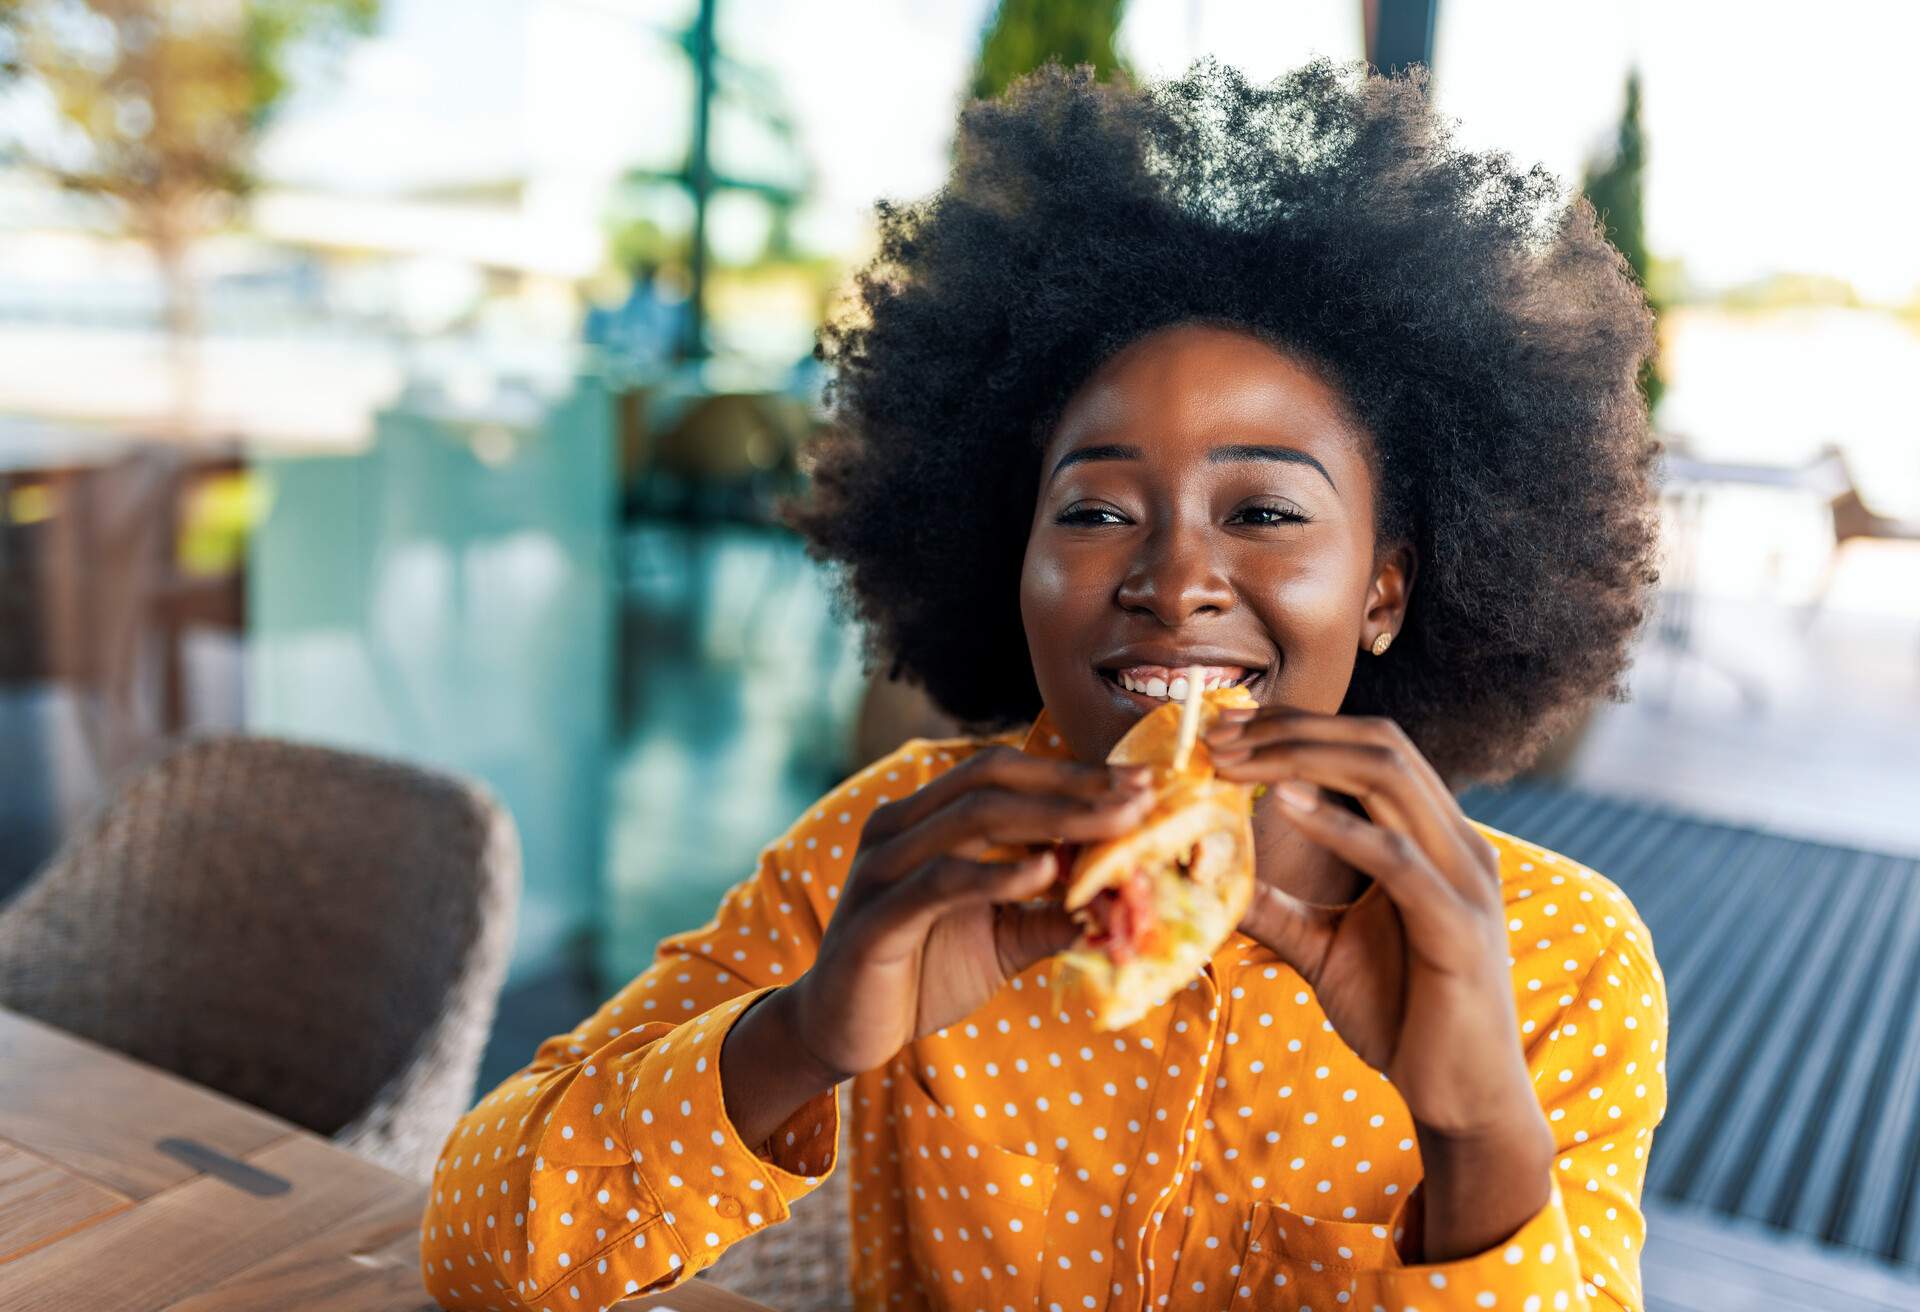 THEME_FOOD_PEOPLE_WOMAN_SANDWICH_GettyImages